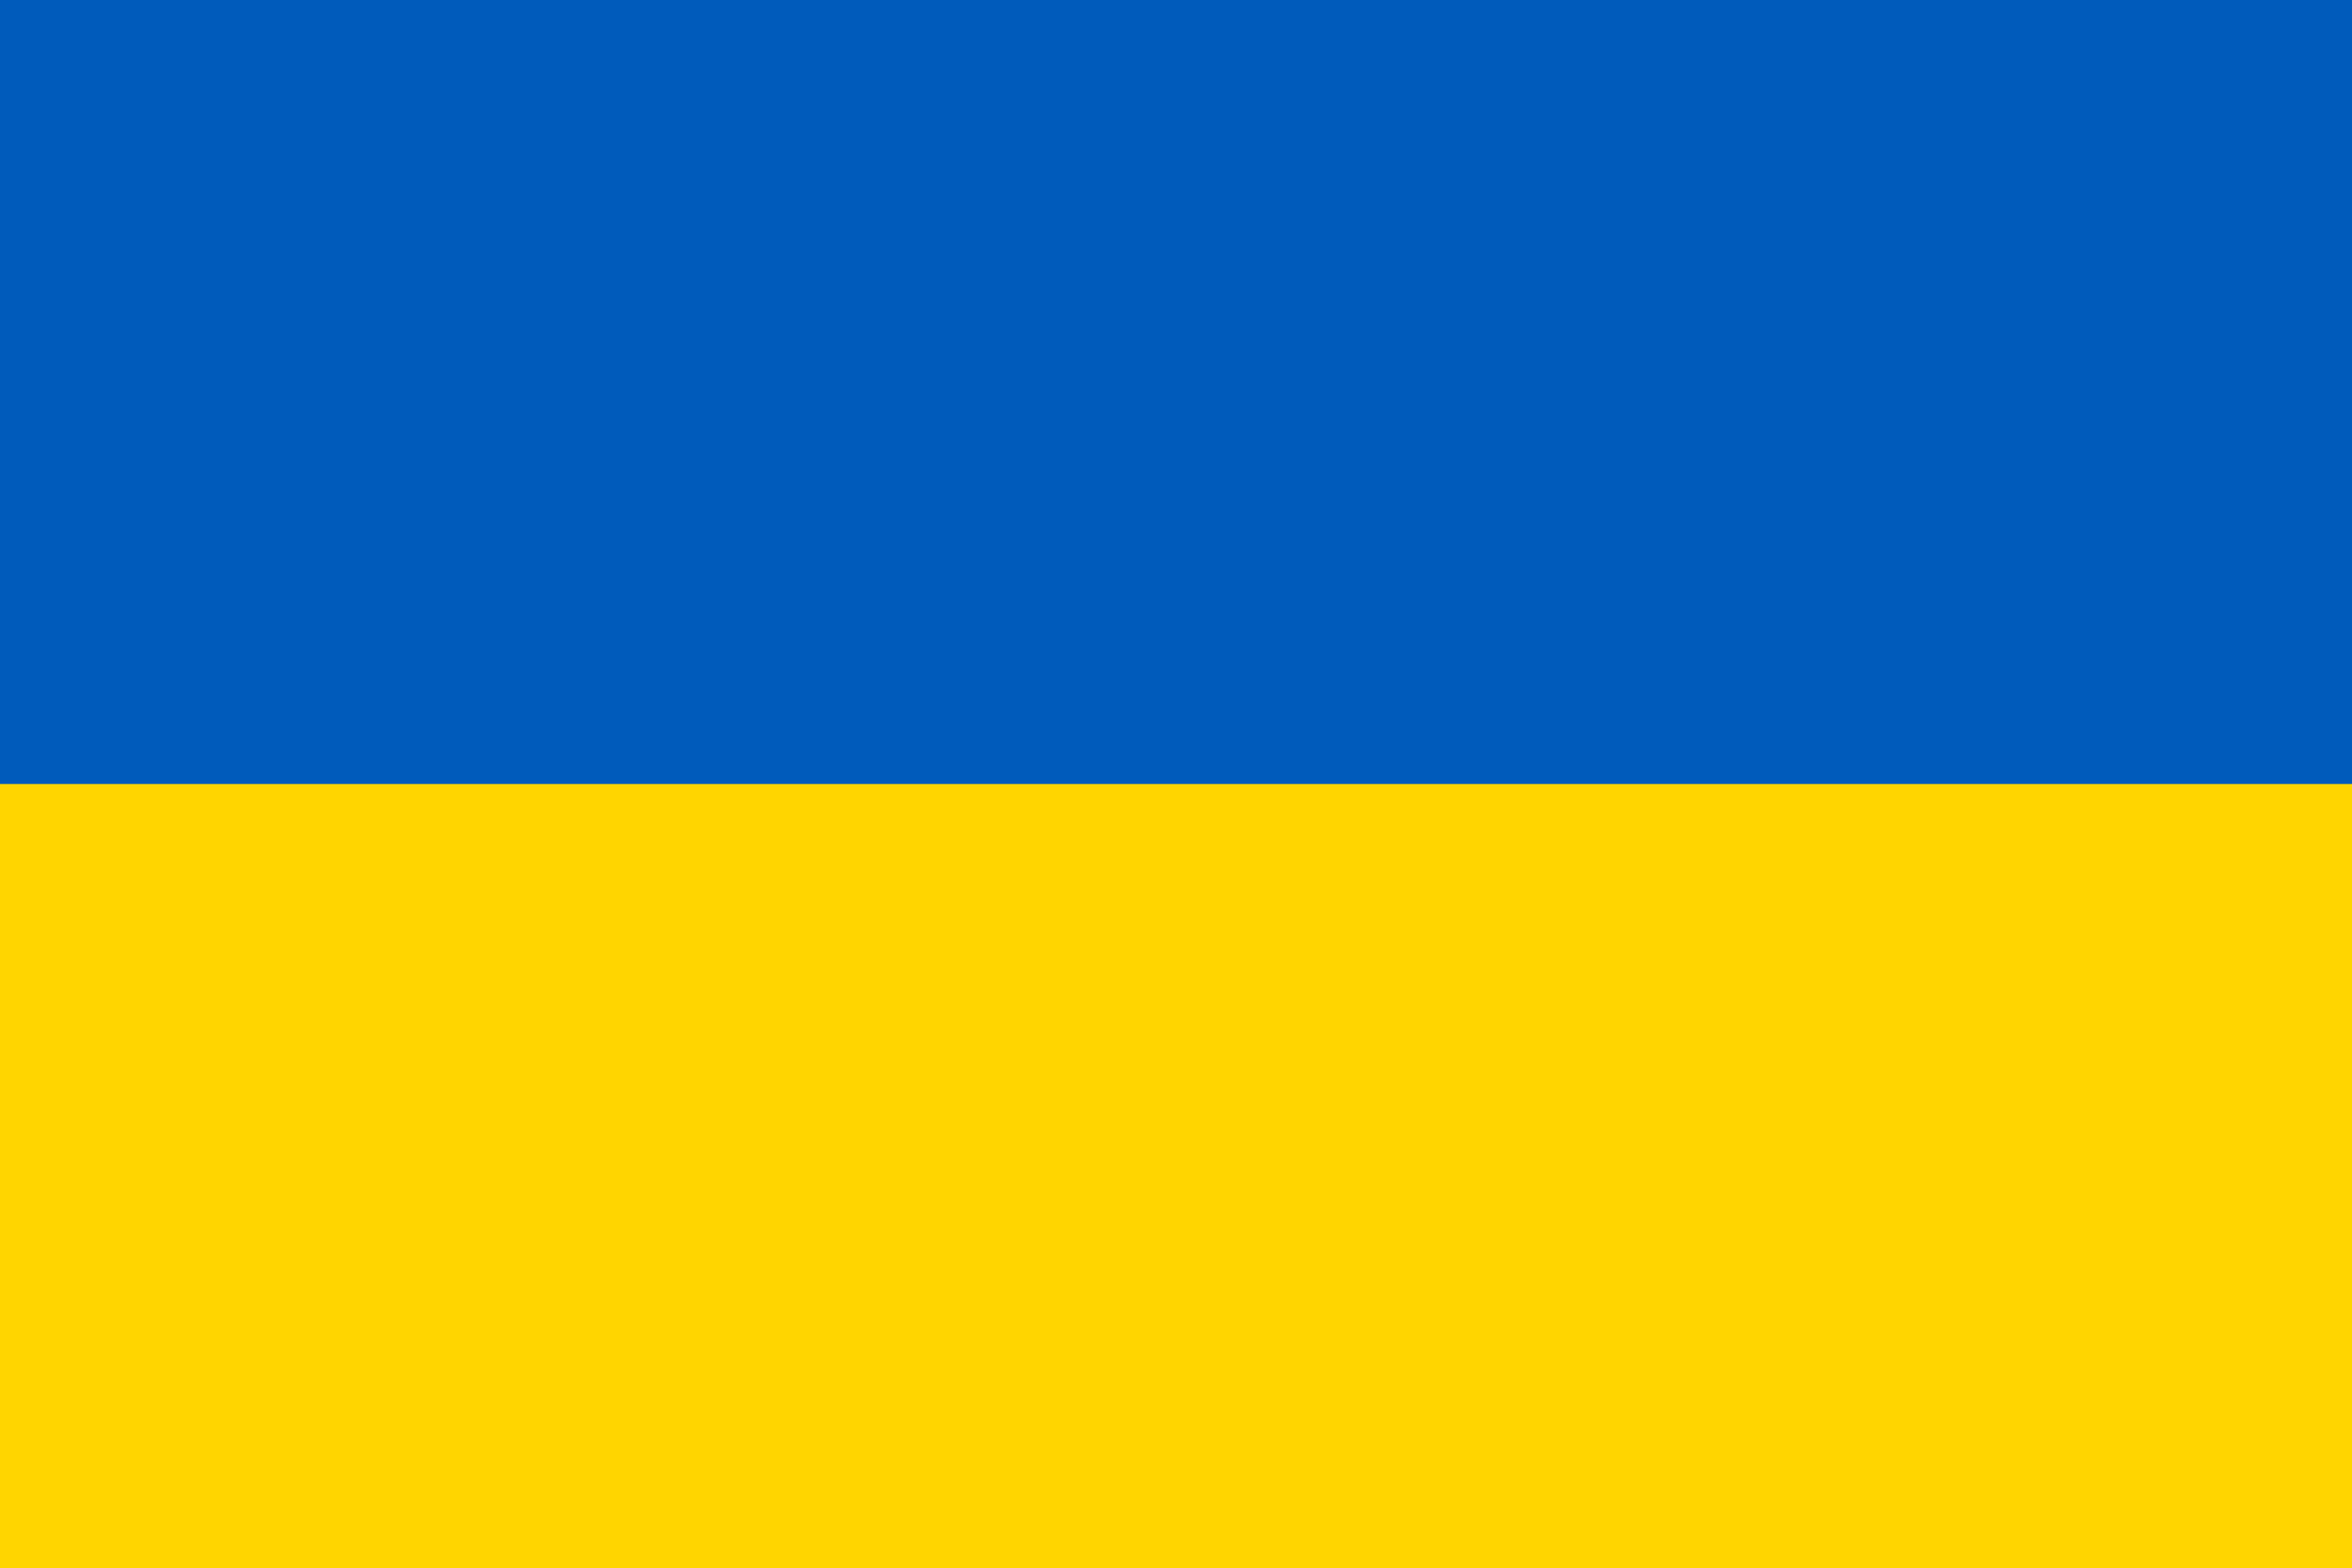 Ukrainian flag. Two horizontal and wide bars of color. Top is Blue and bottom is yellow